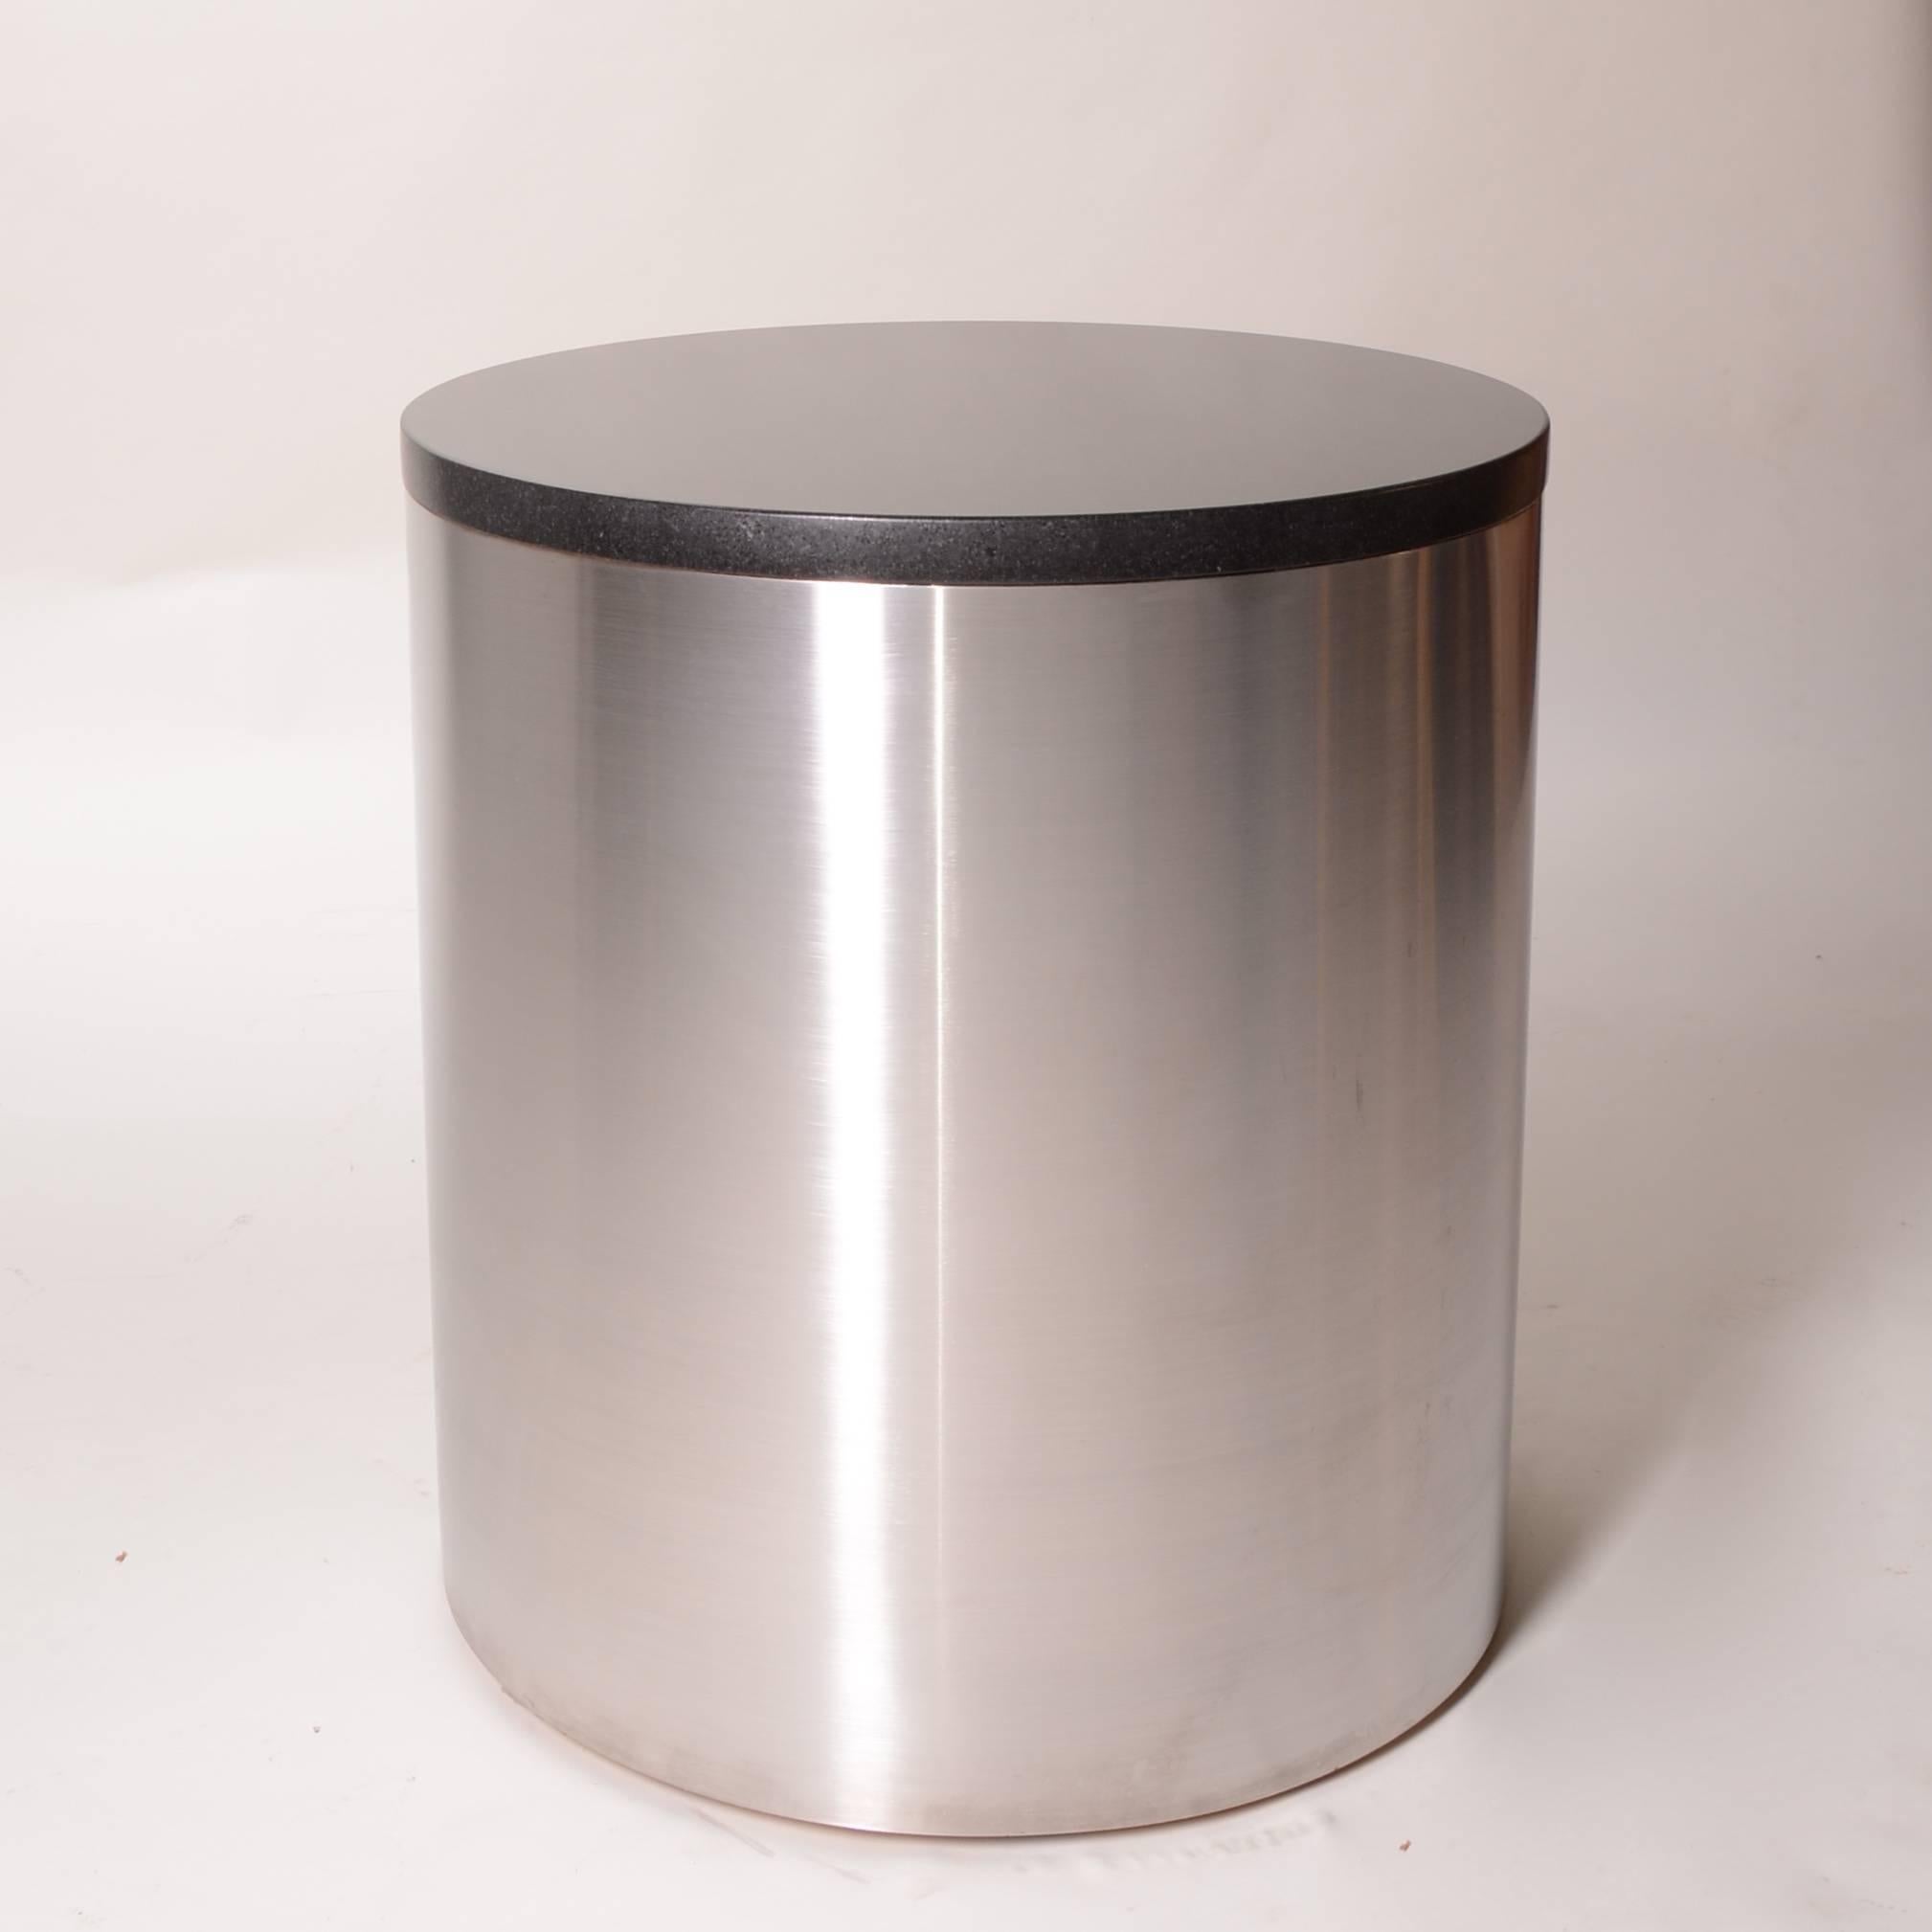 Brushed stainless steel and marble drum table by Milo Baughman for Thayer Coggin. This piece is in excellent condition. From the estate of the late great composer Gary Geld. 
This item is located at our east Hollywood showroom. Please come see our